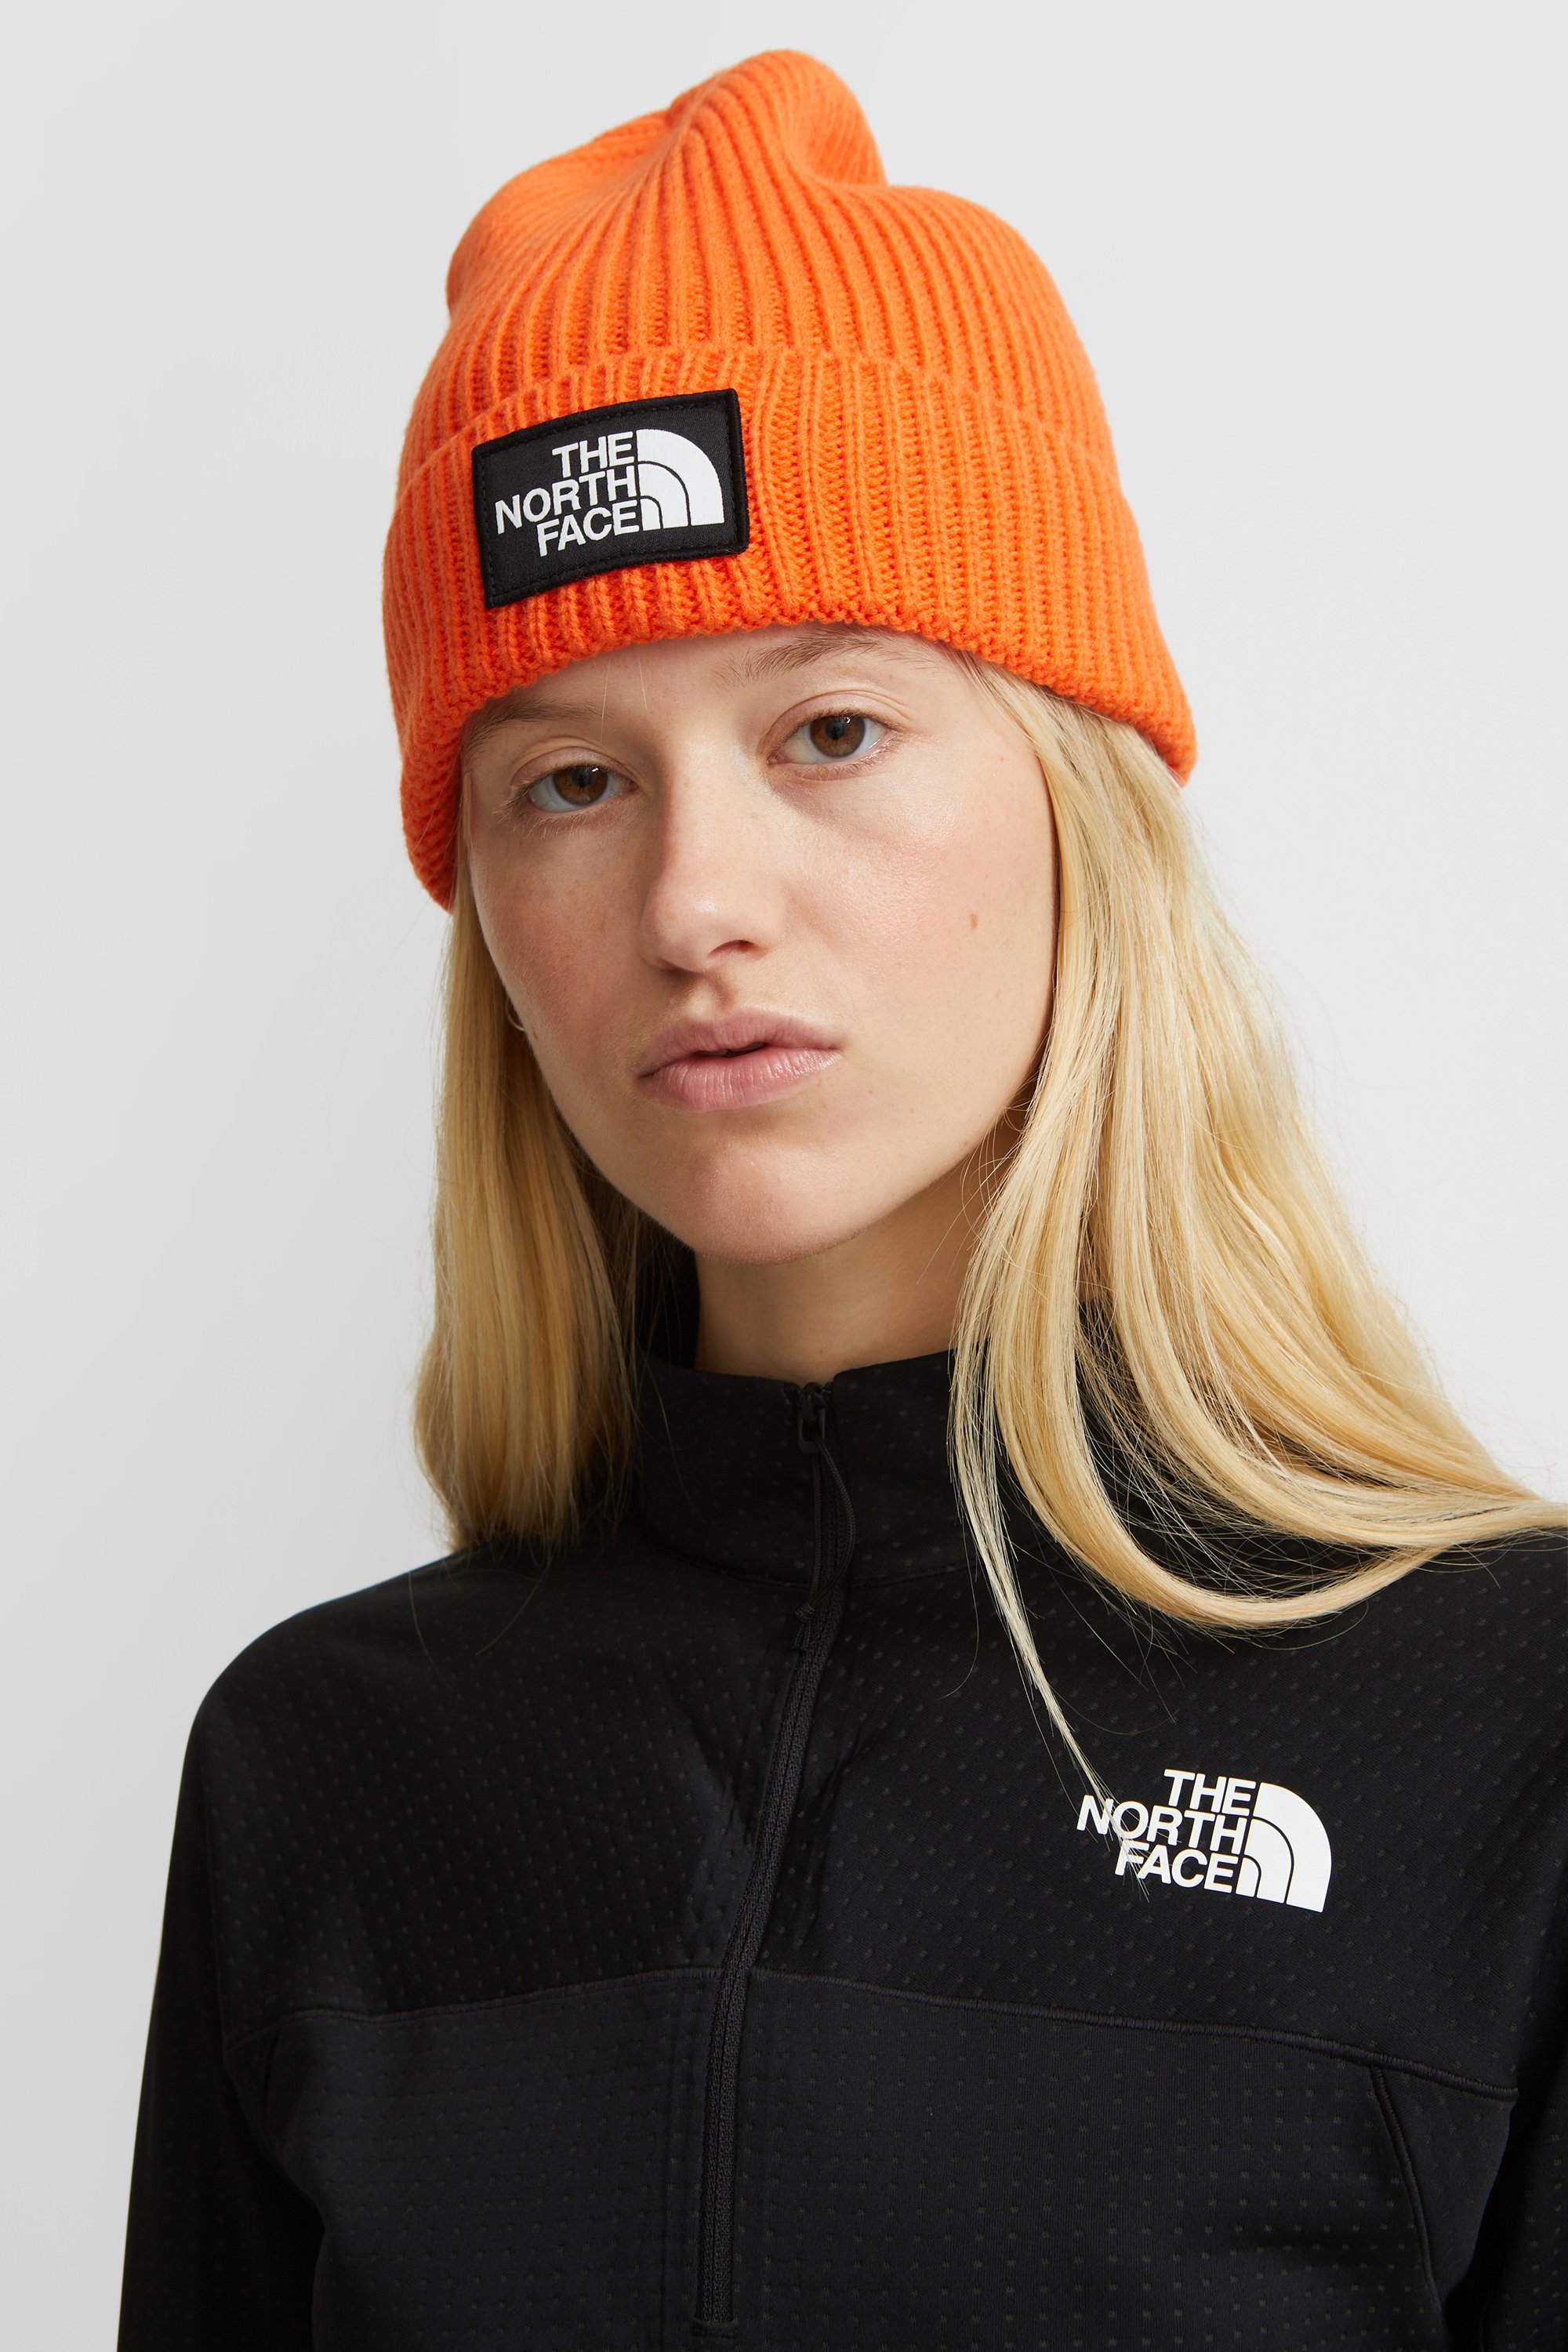 The North Face Logo Box Cuff Beanie Online Offers, Save 45 jlcatj.gob.mx